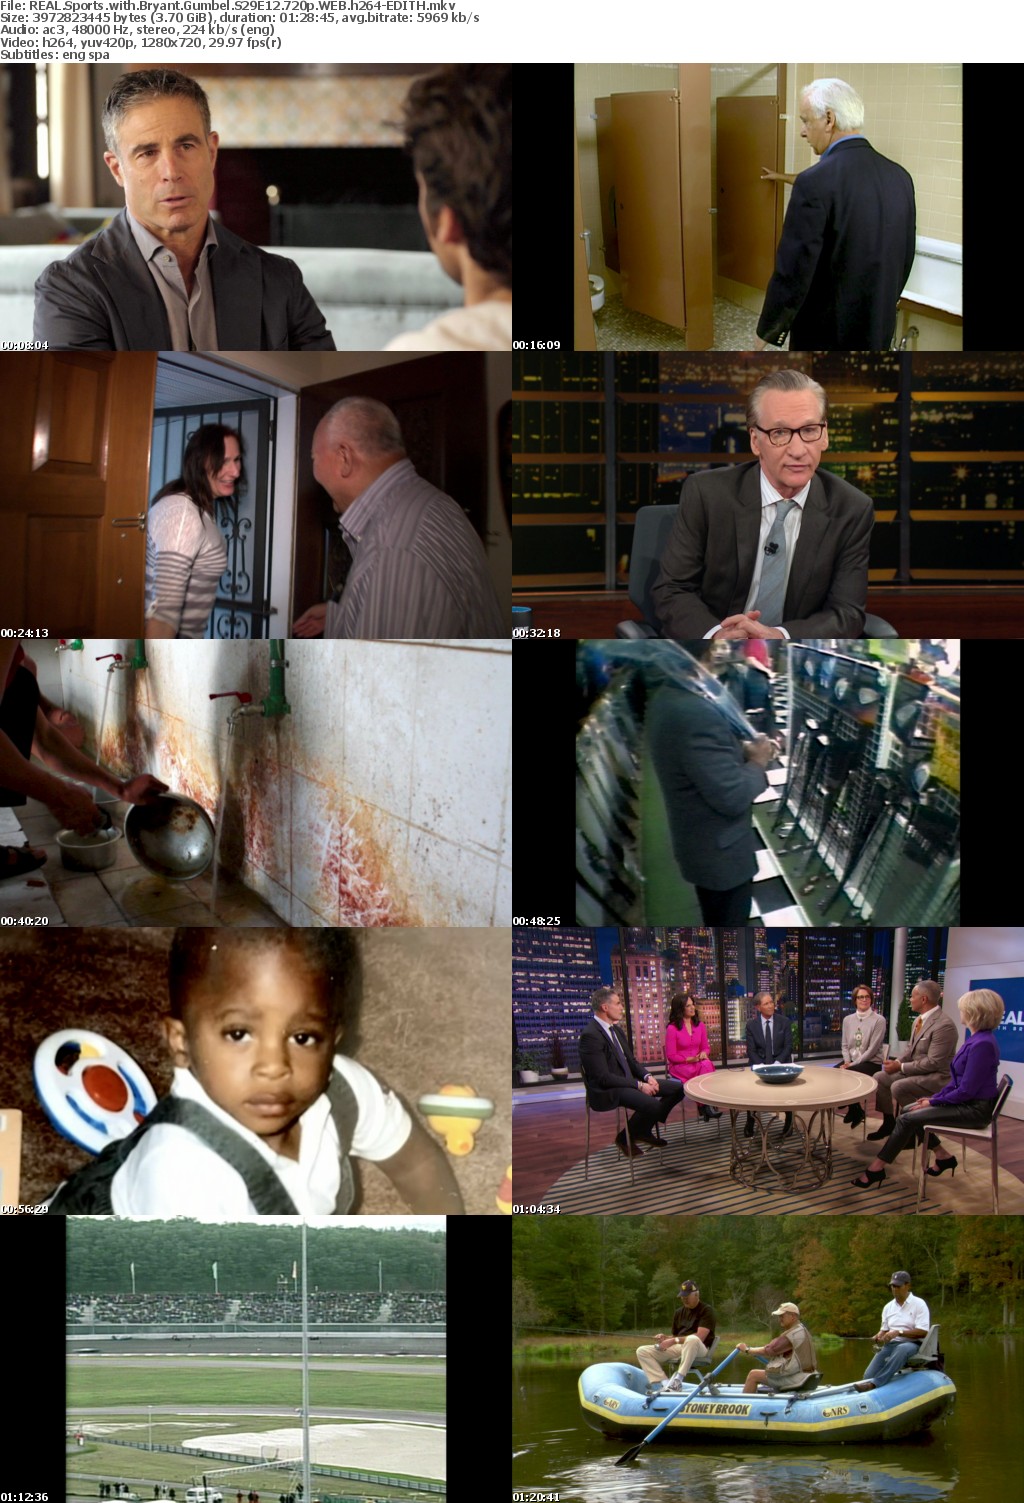 REAL Sports with Bryant Gumbel S29E12 720p WEB h264-EDITH